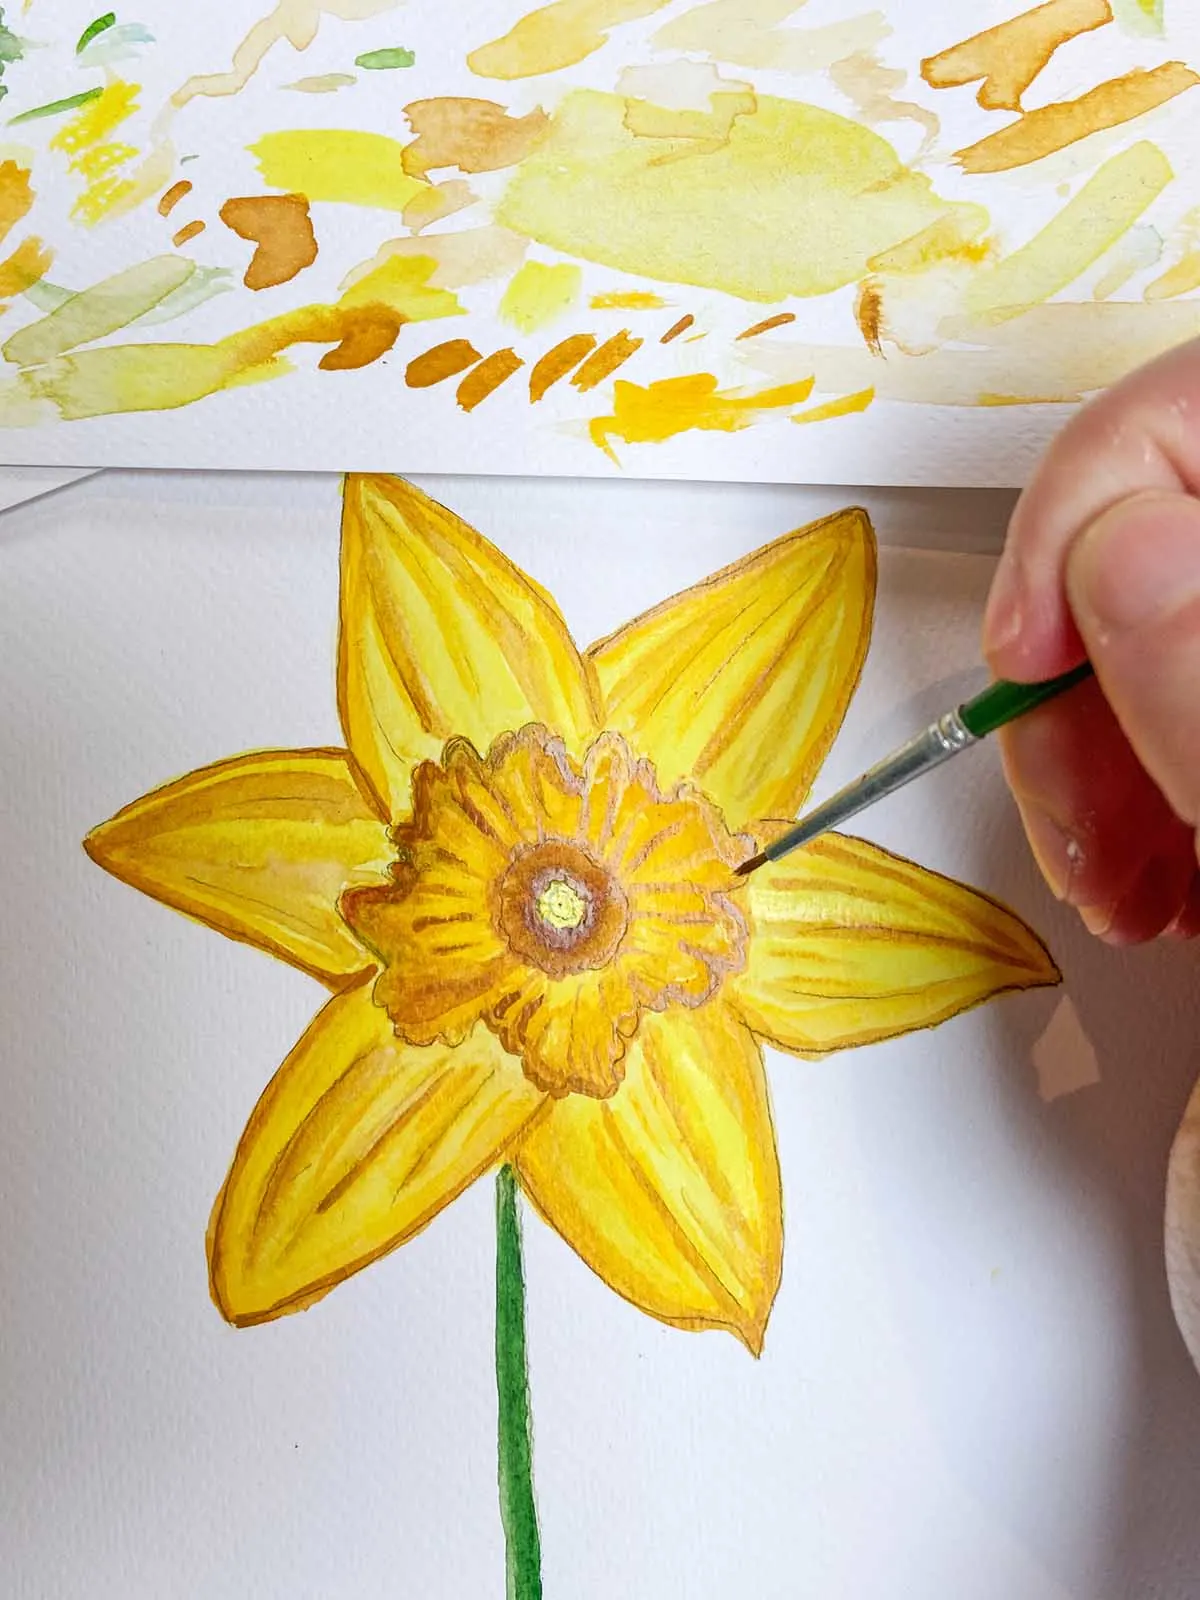 How to draw a daffodil flower and paint it